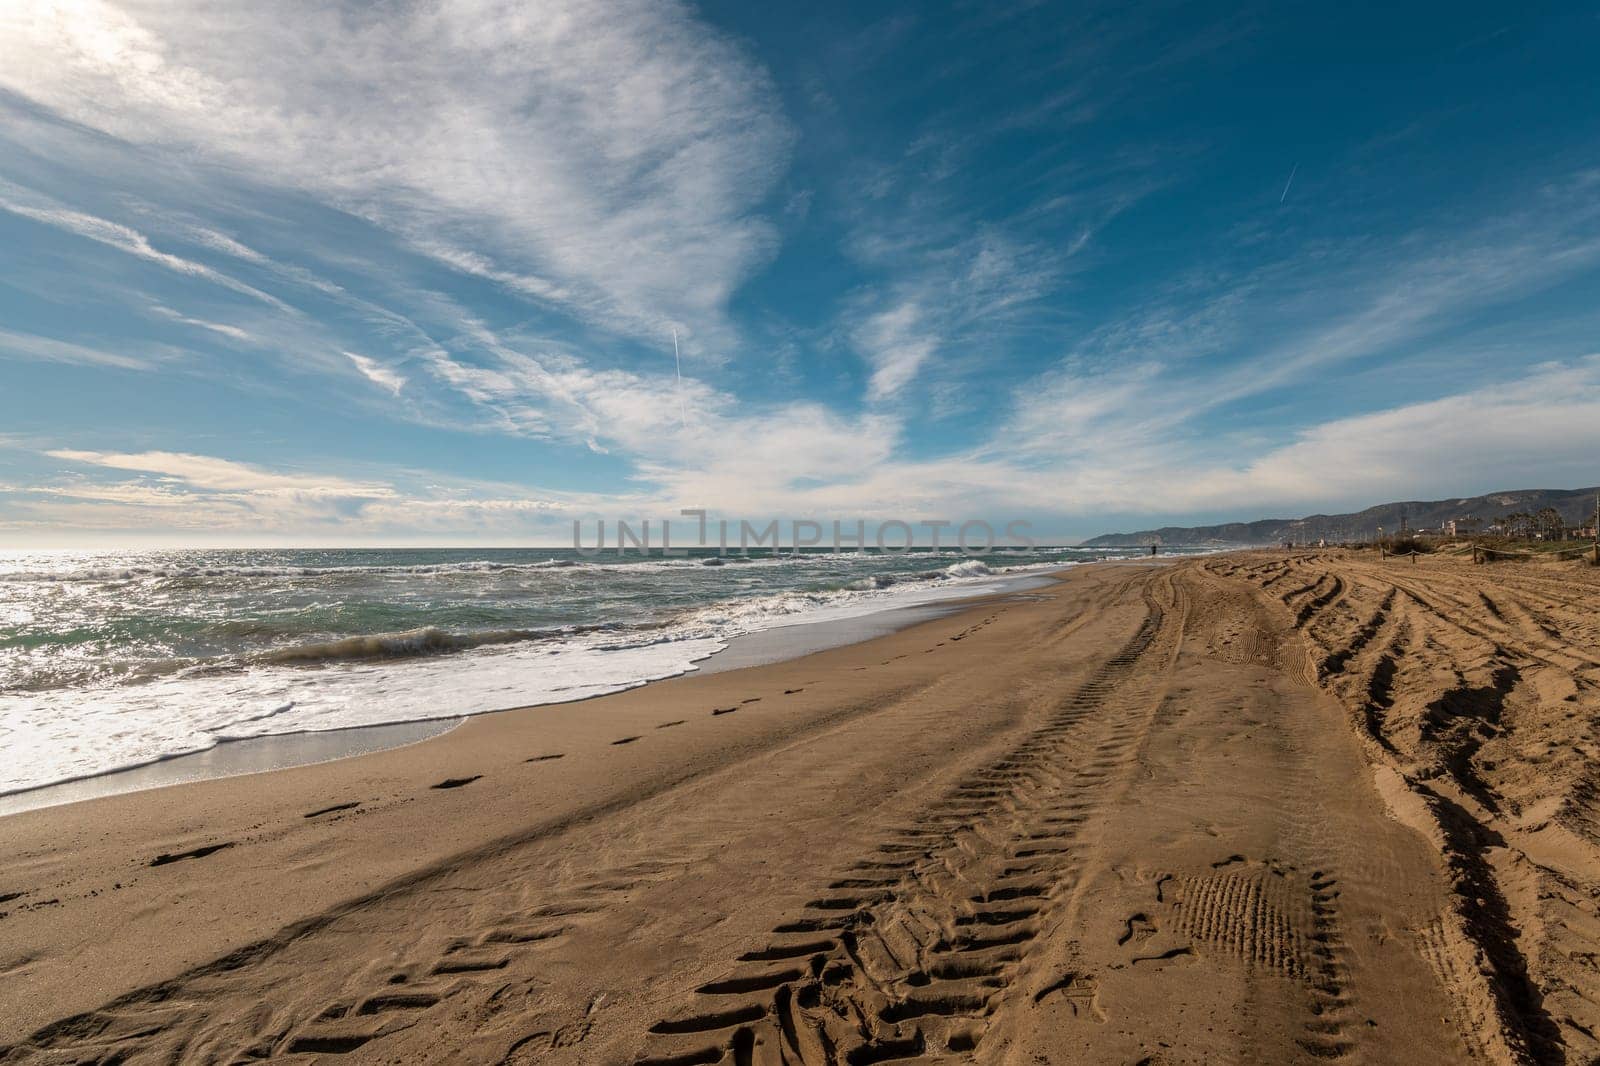 Expansive Sandy Shoreline with Tire Tracks Stretching Towards the Horizon Under Blue Skies by apavlin